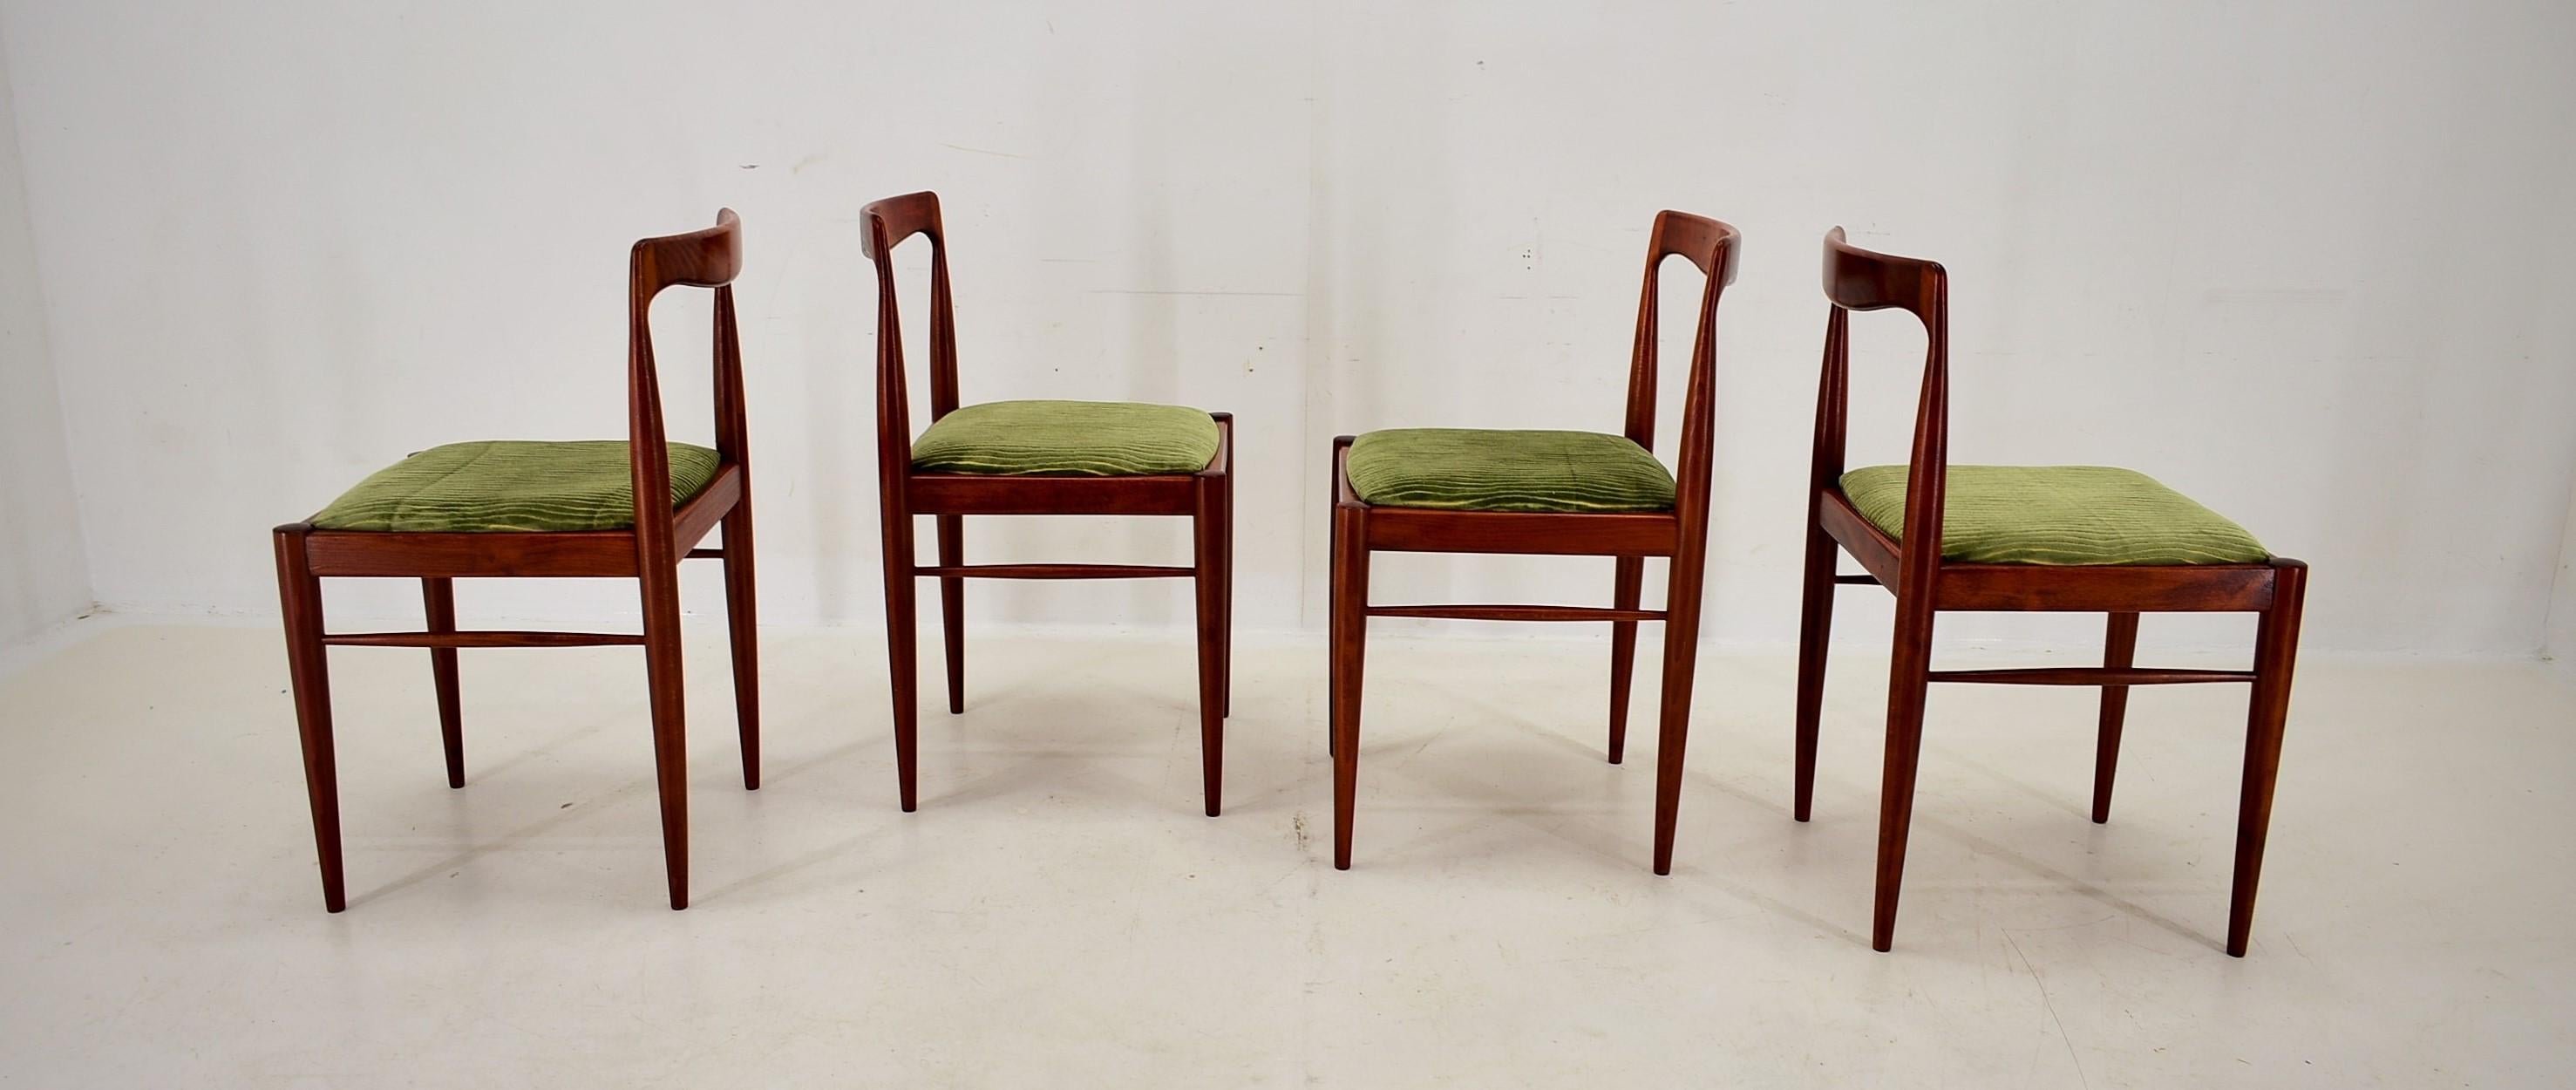 Fabric Mid-Century Dining Chairs by Karel Vyčítal, 1960's For Sale